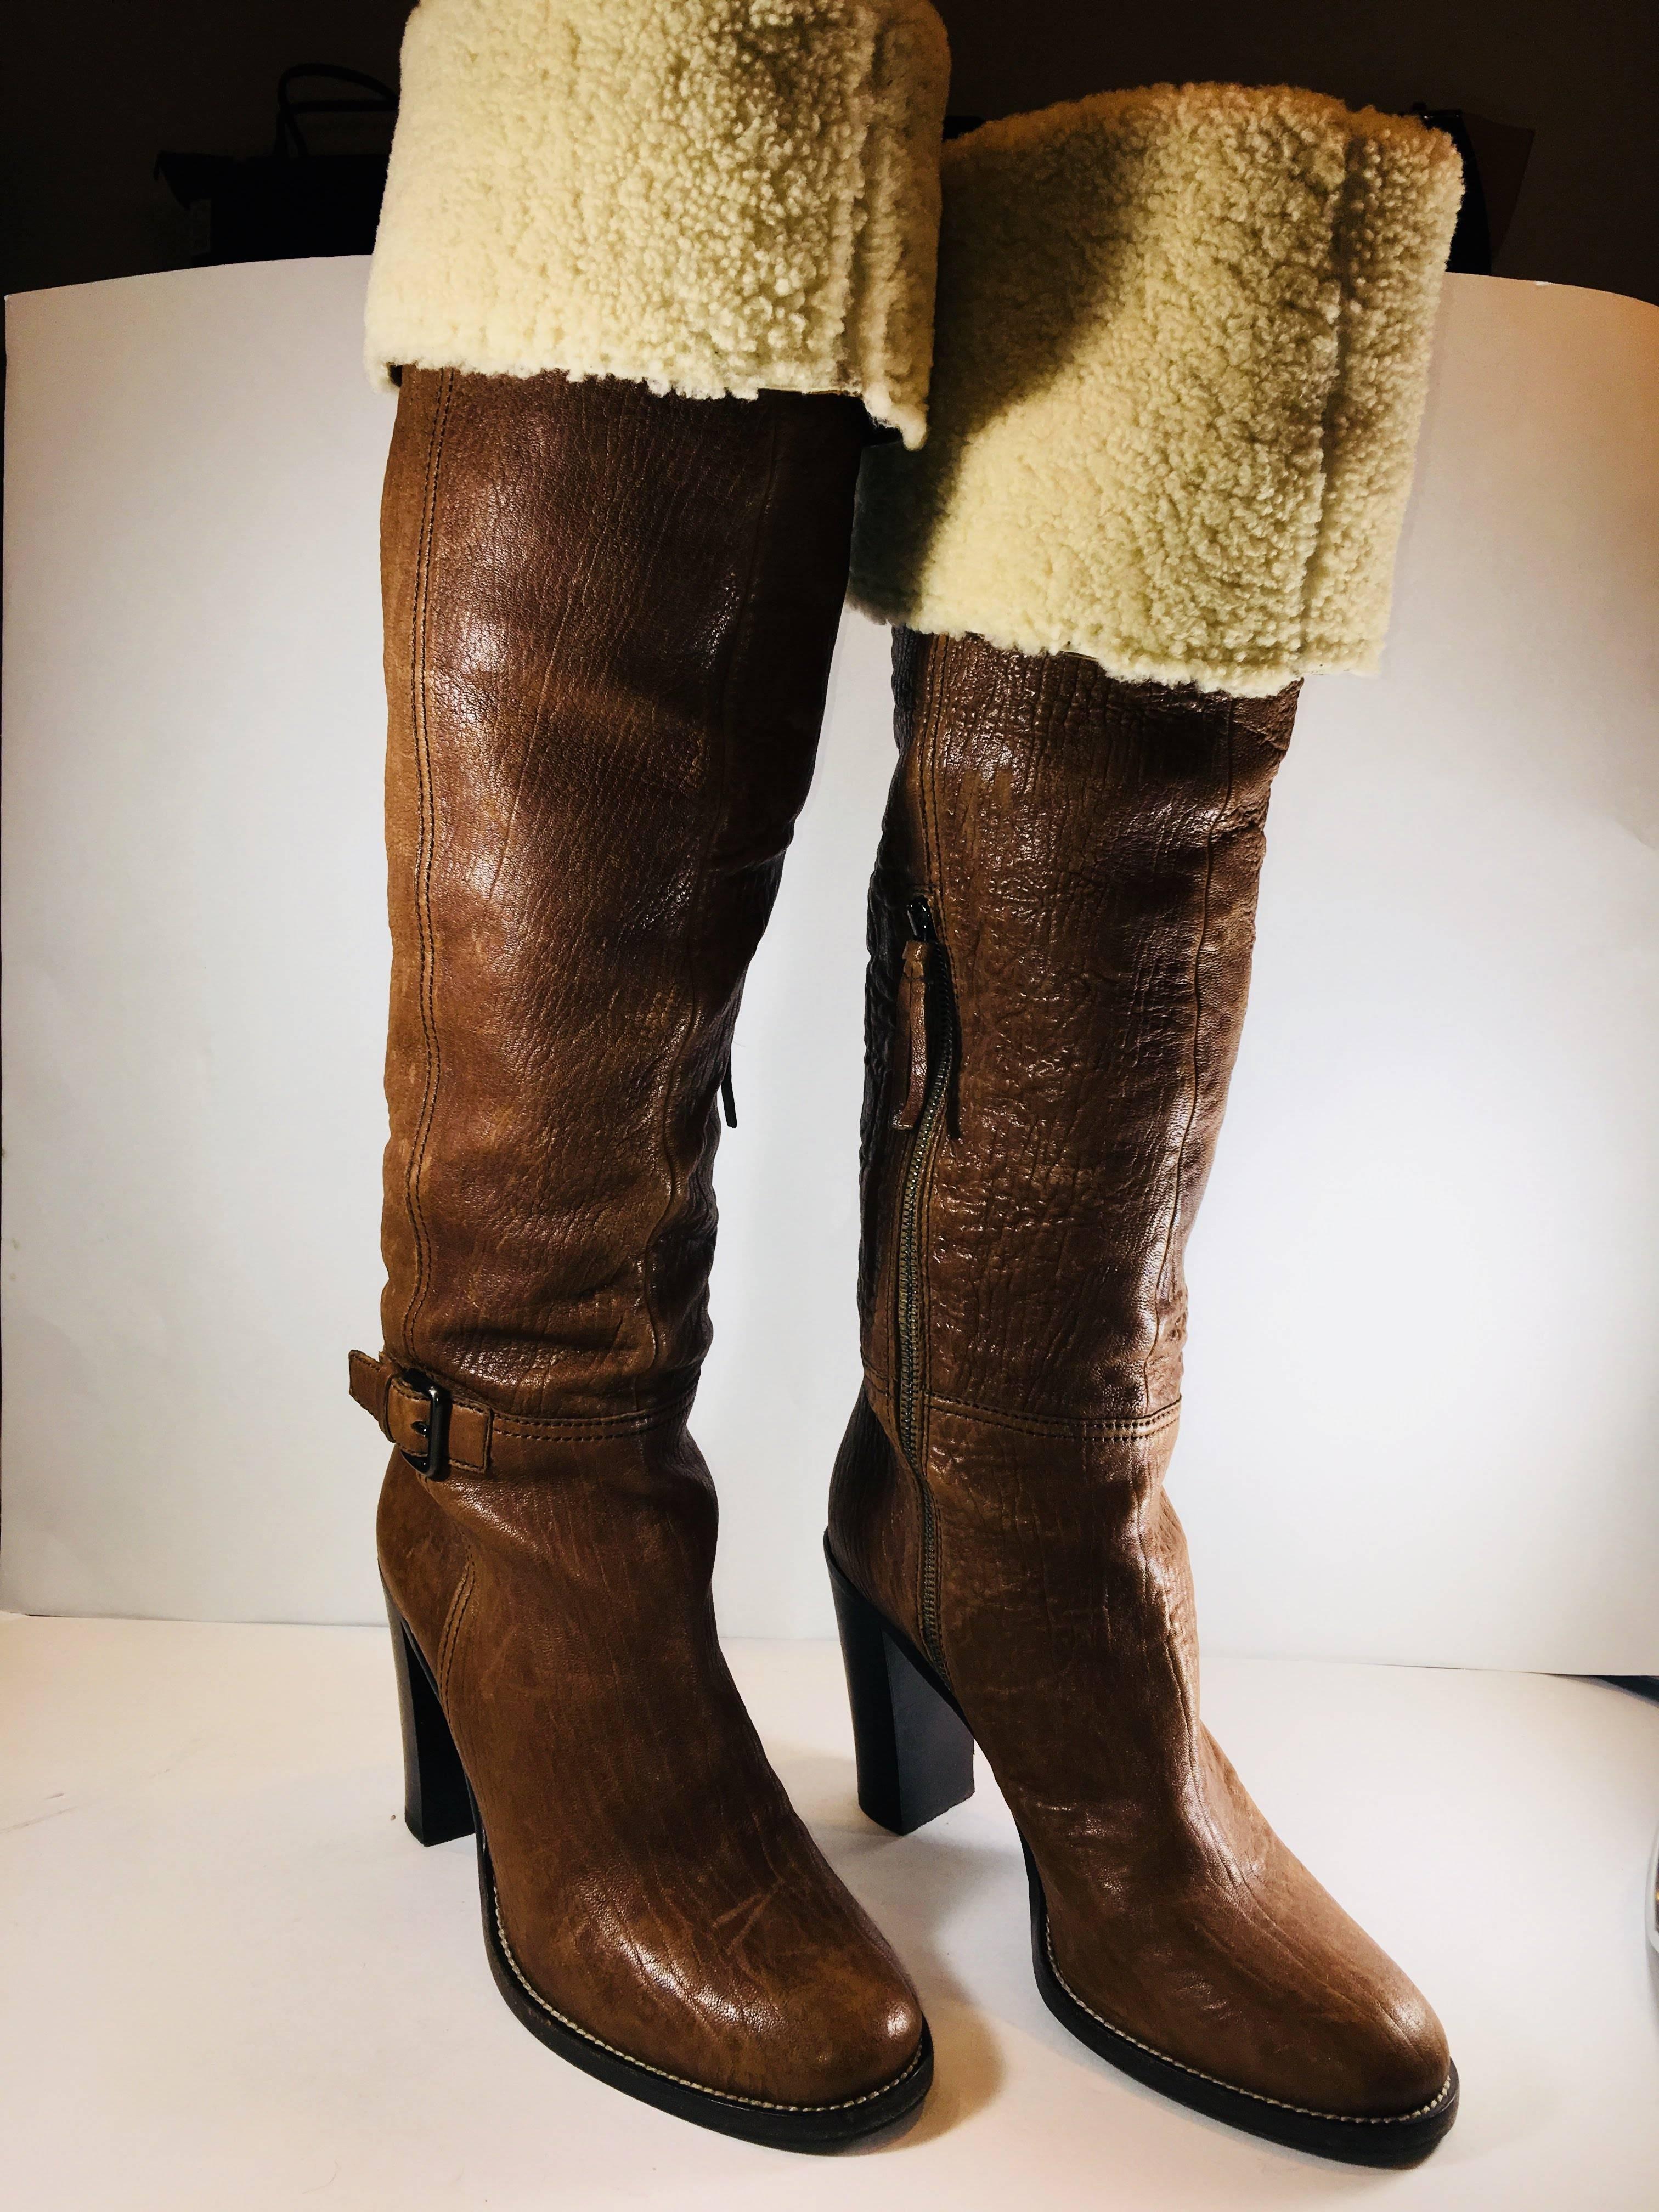 MiuMiu Knee High Tan Lambskin Boots with Faux Fur Cuffs and Side Zippers.